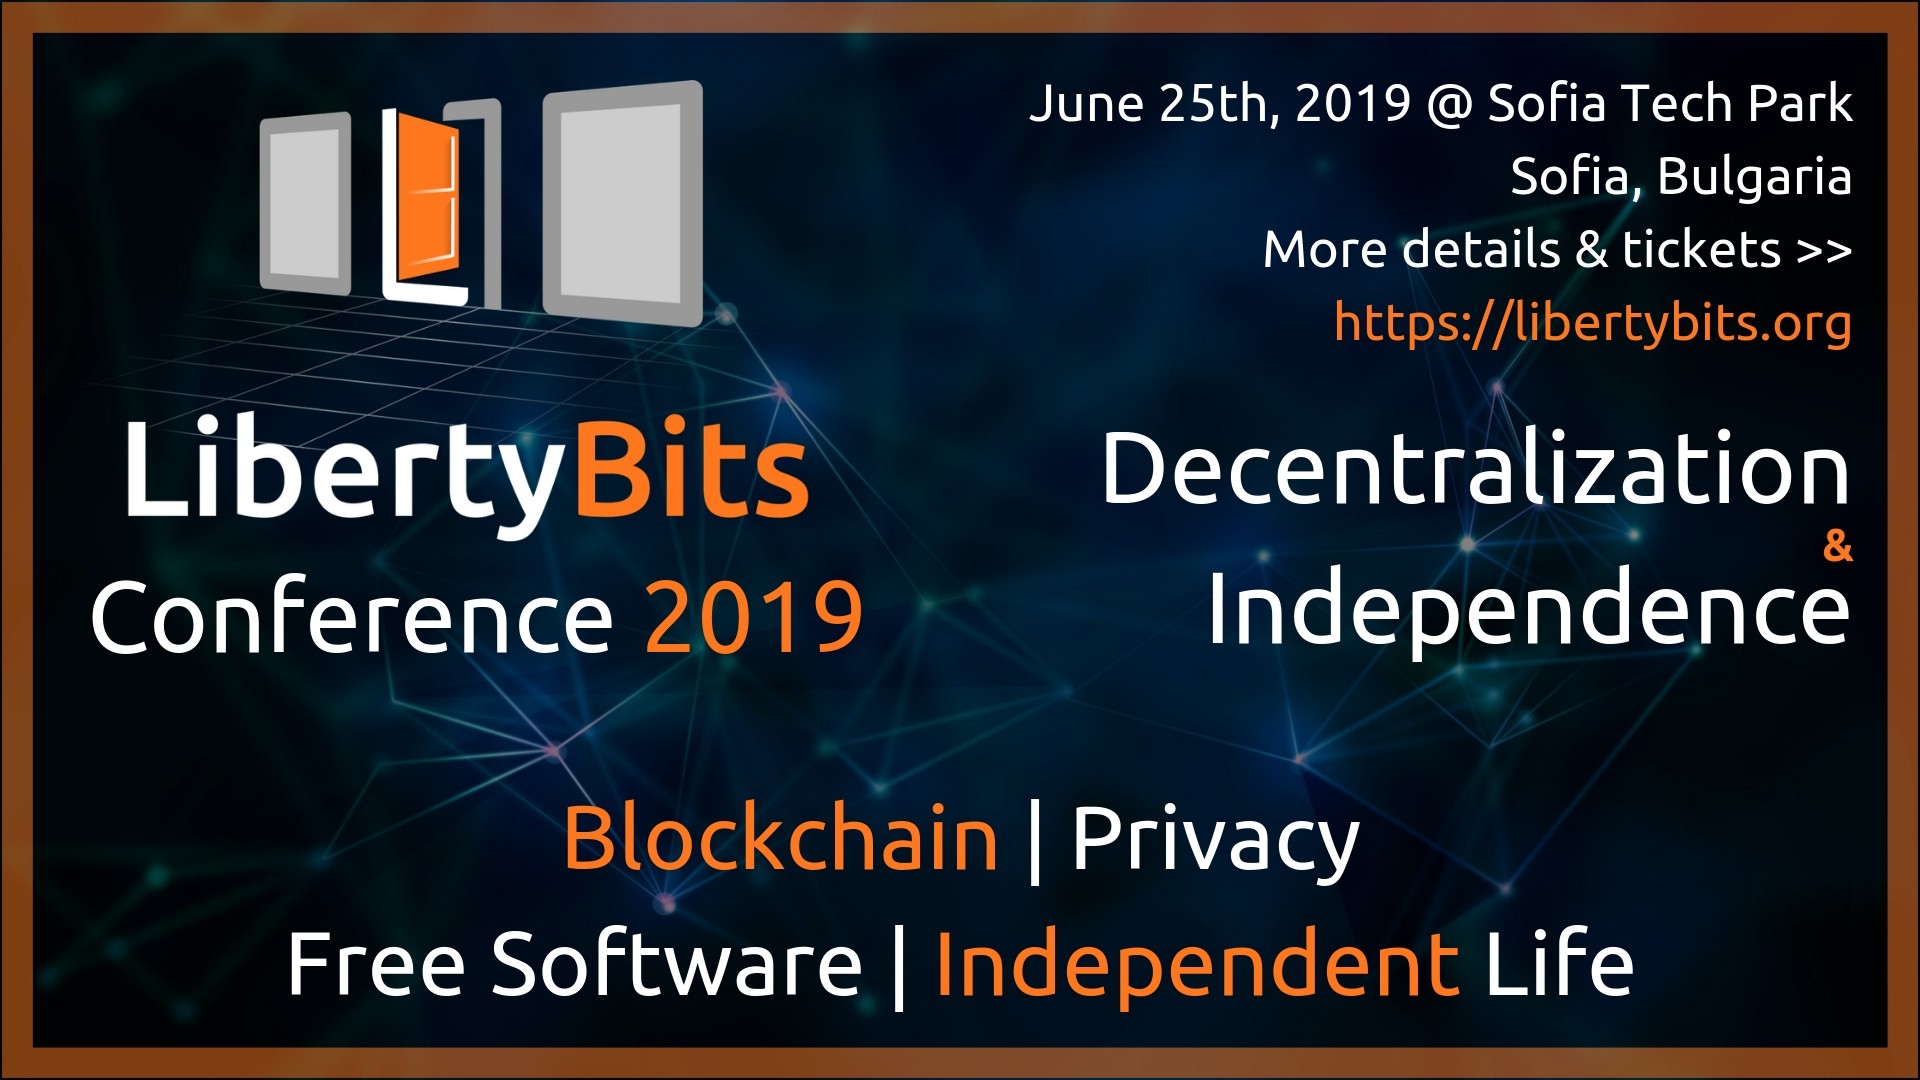 LibertyBits on June 25th, 2019 in Sofia